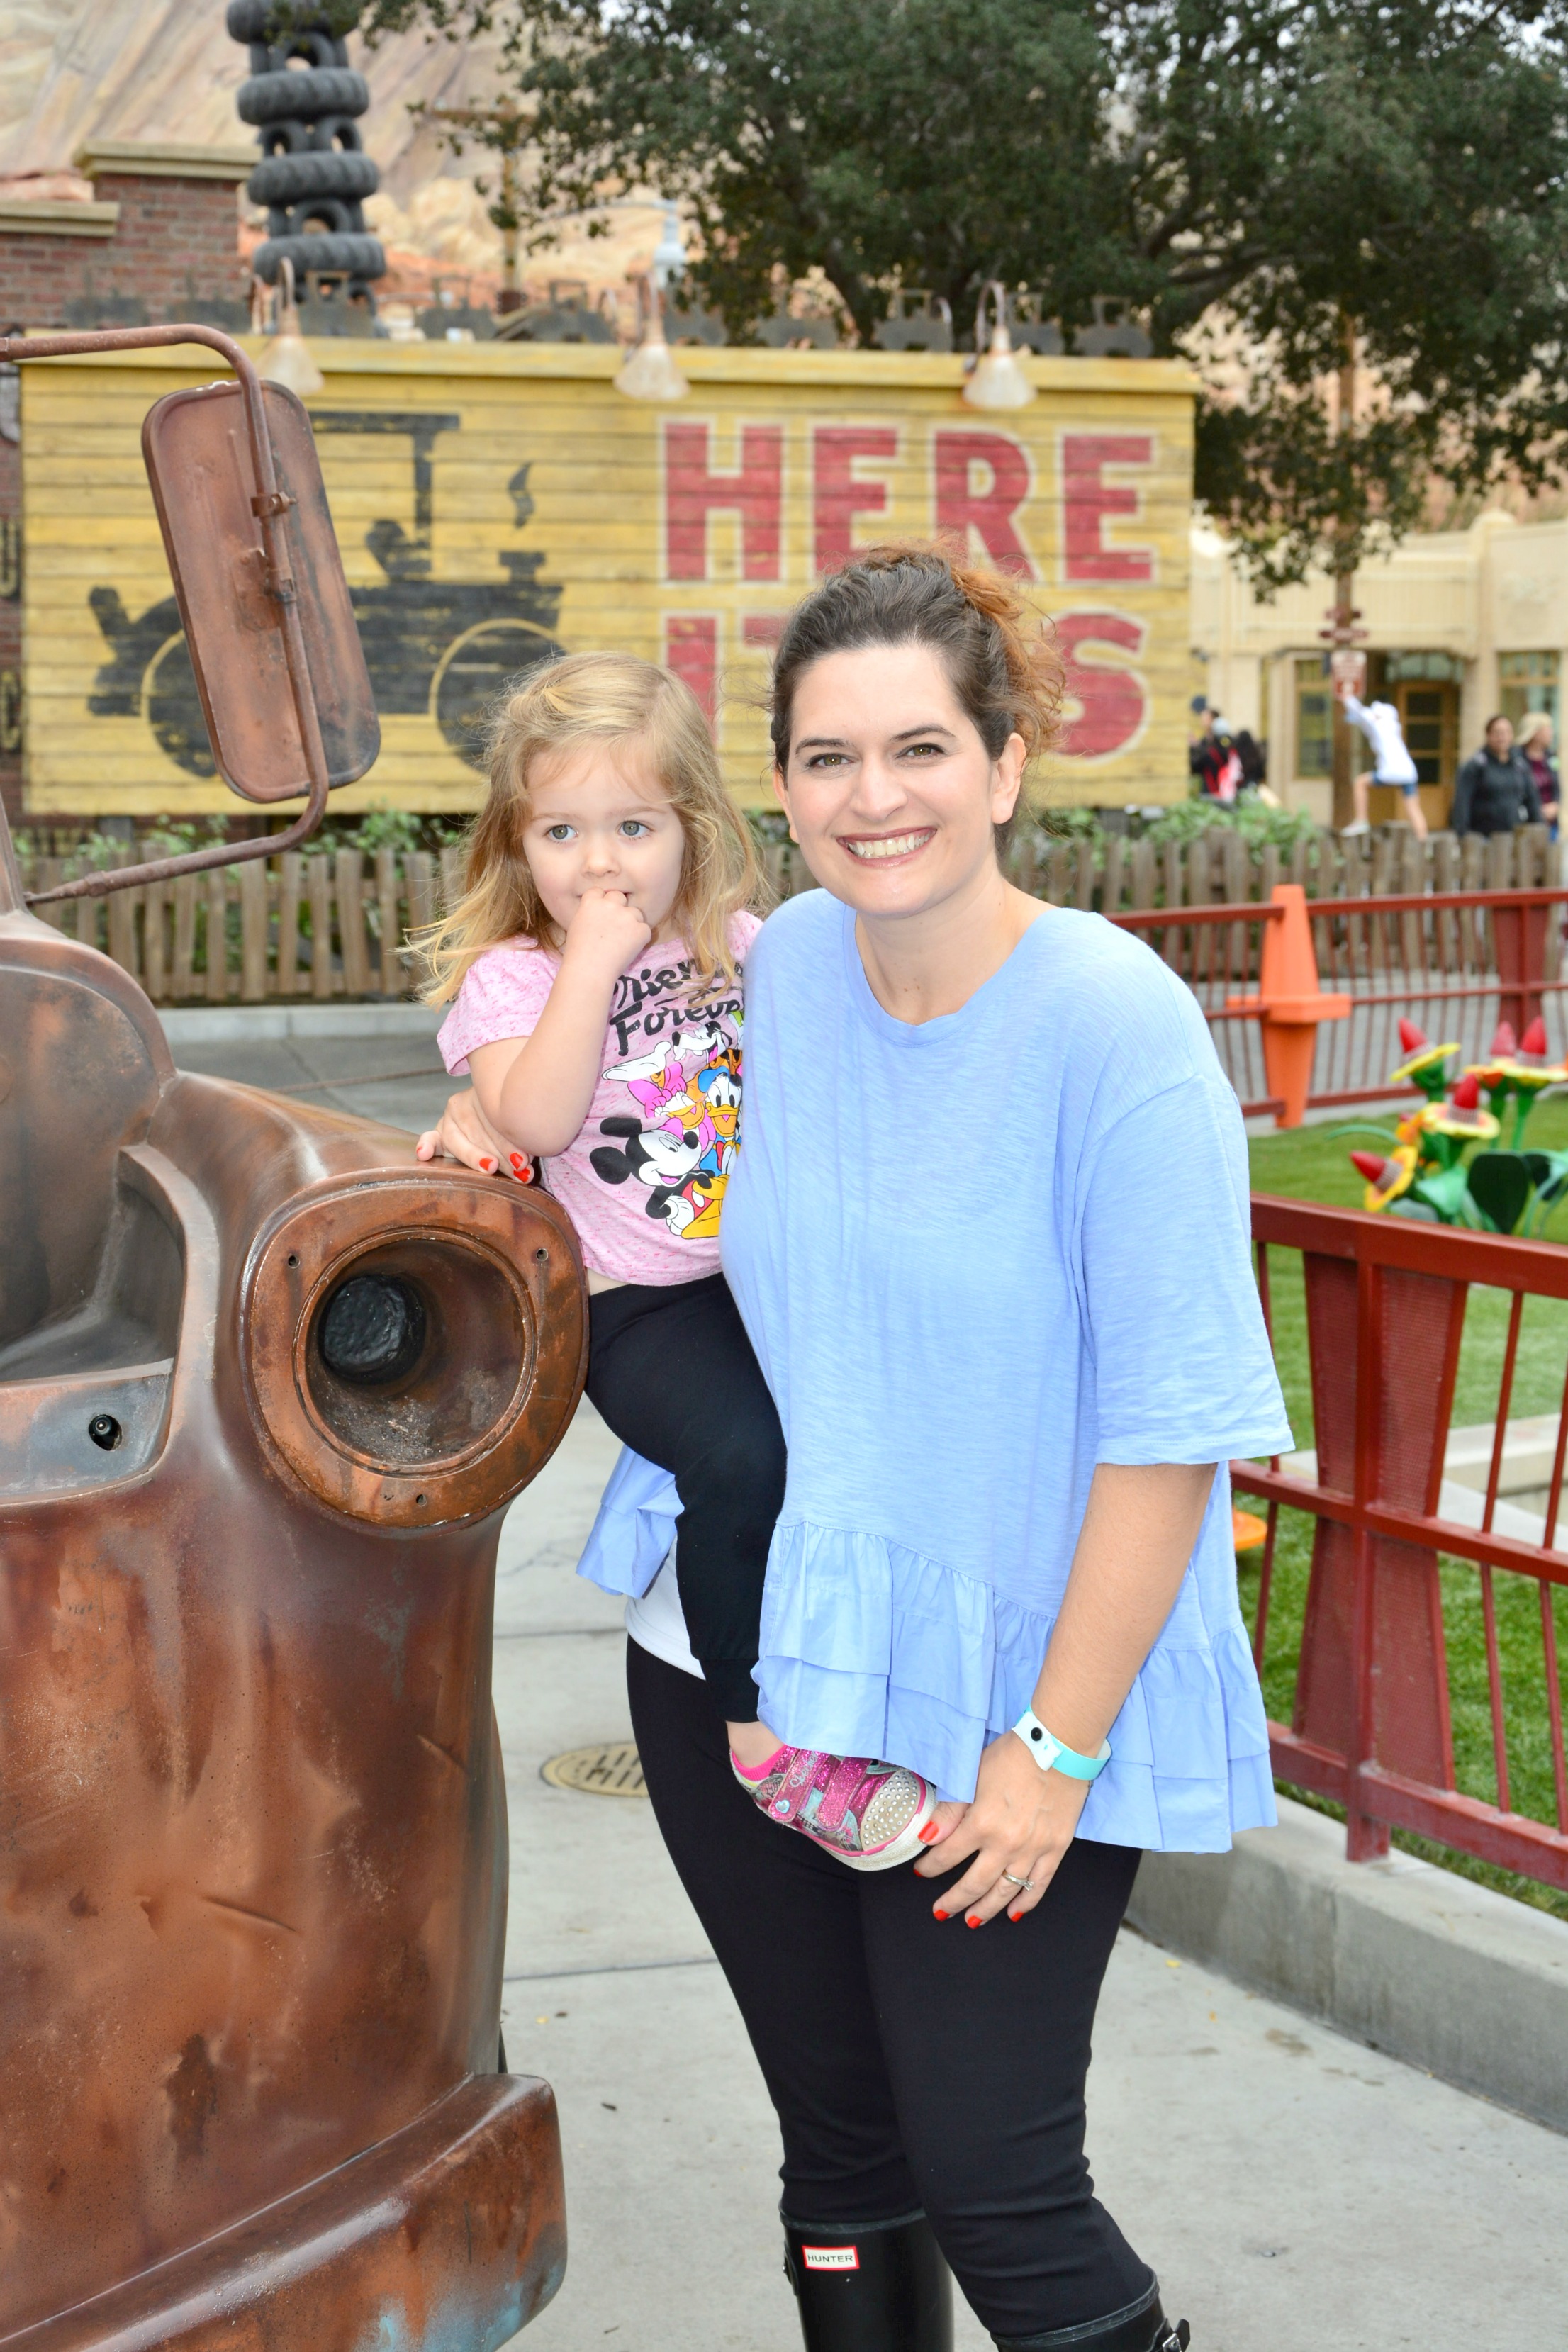 Planning a Disneyland vacation with preschoolers in tow? Learn how to do Disneyland with Preschoolers from a California native.